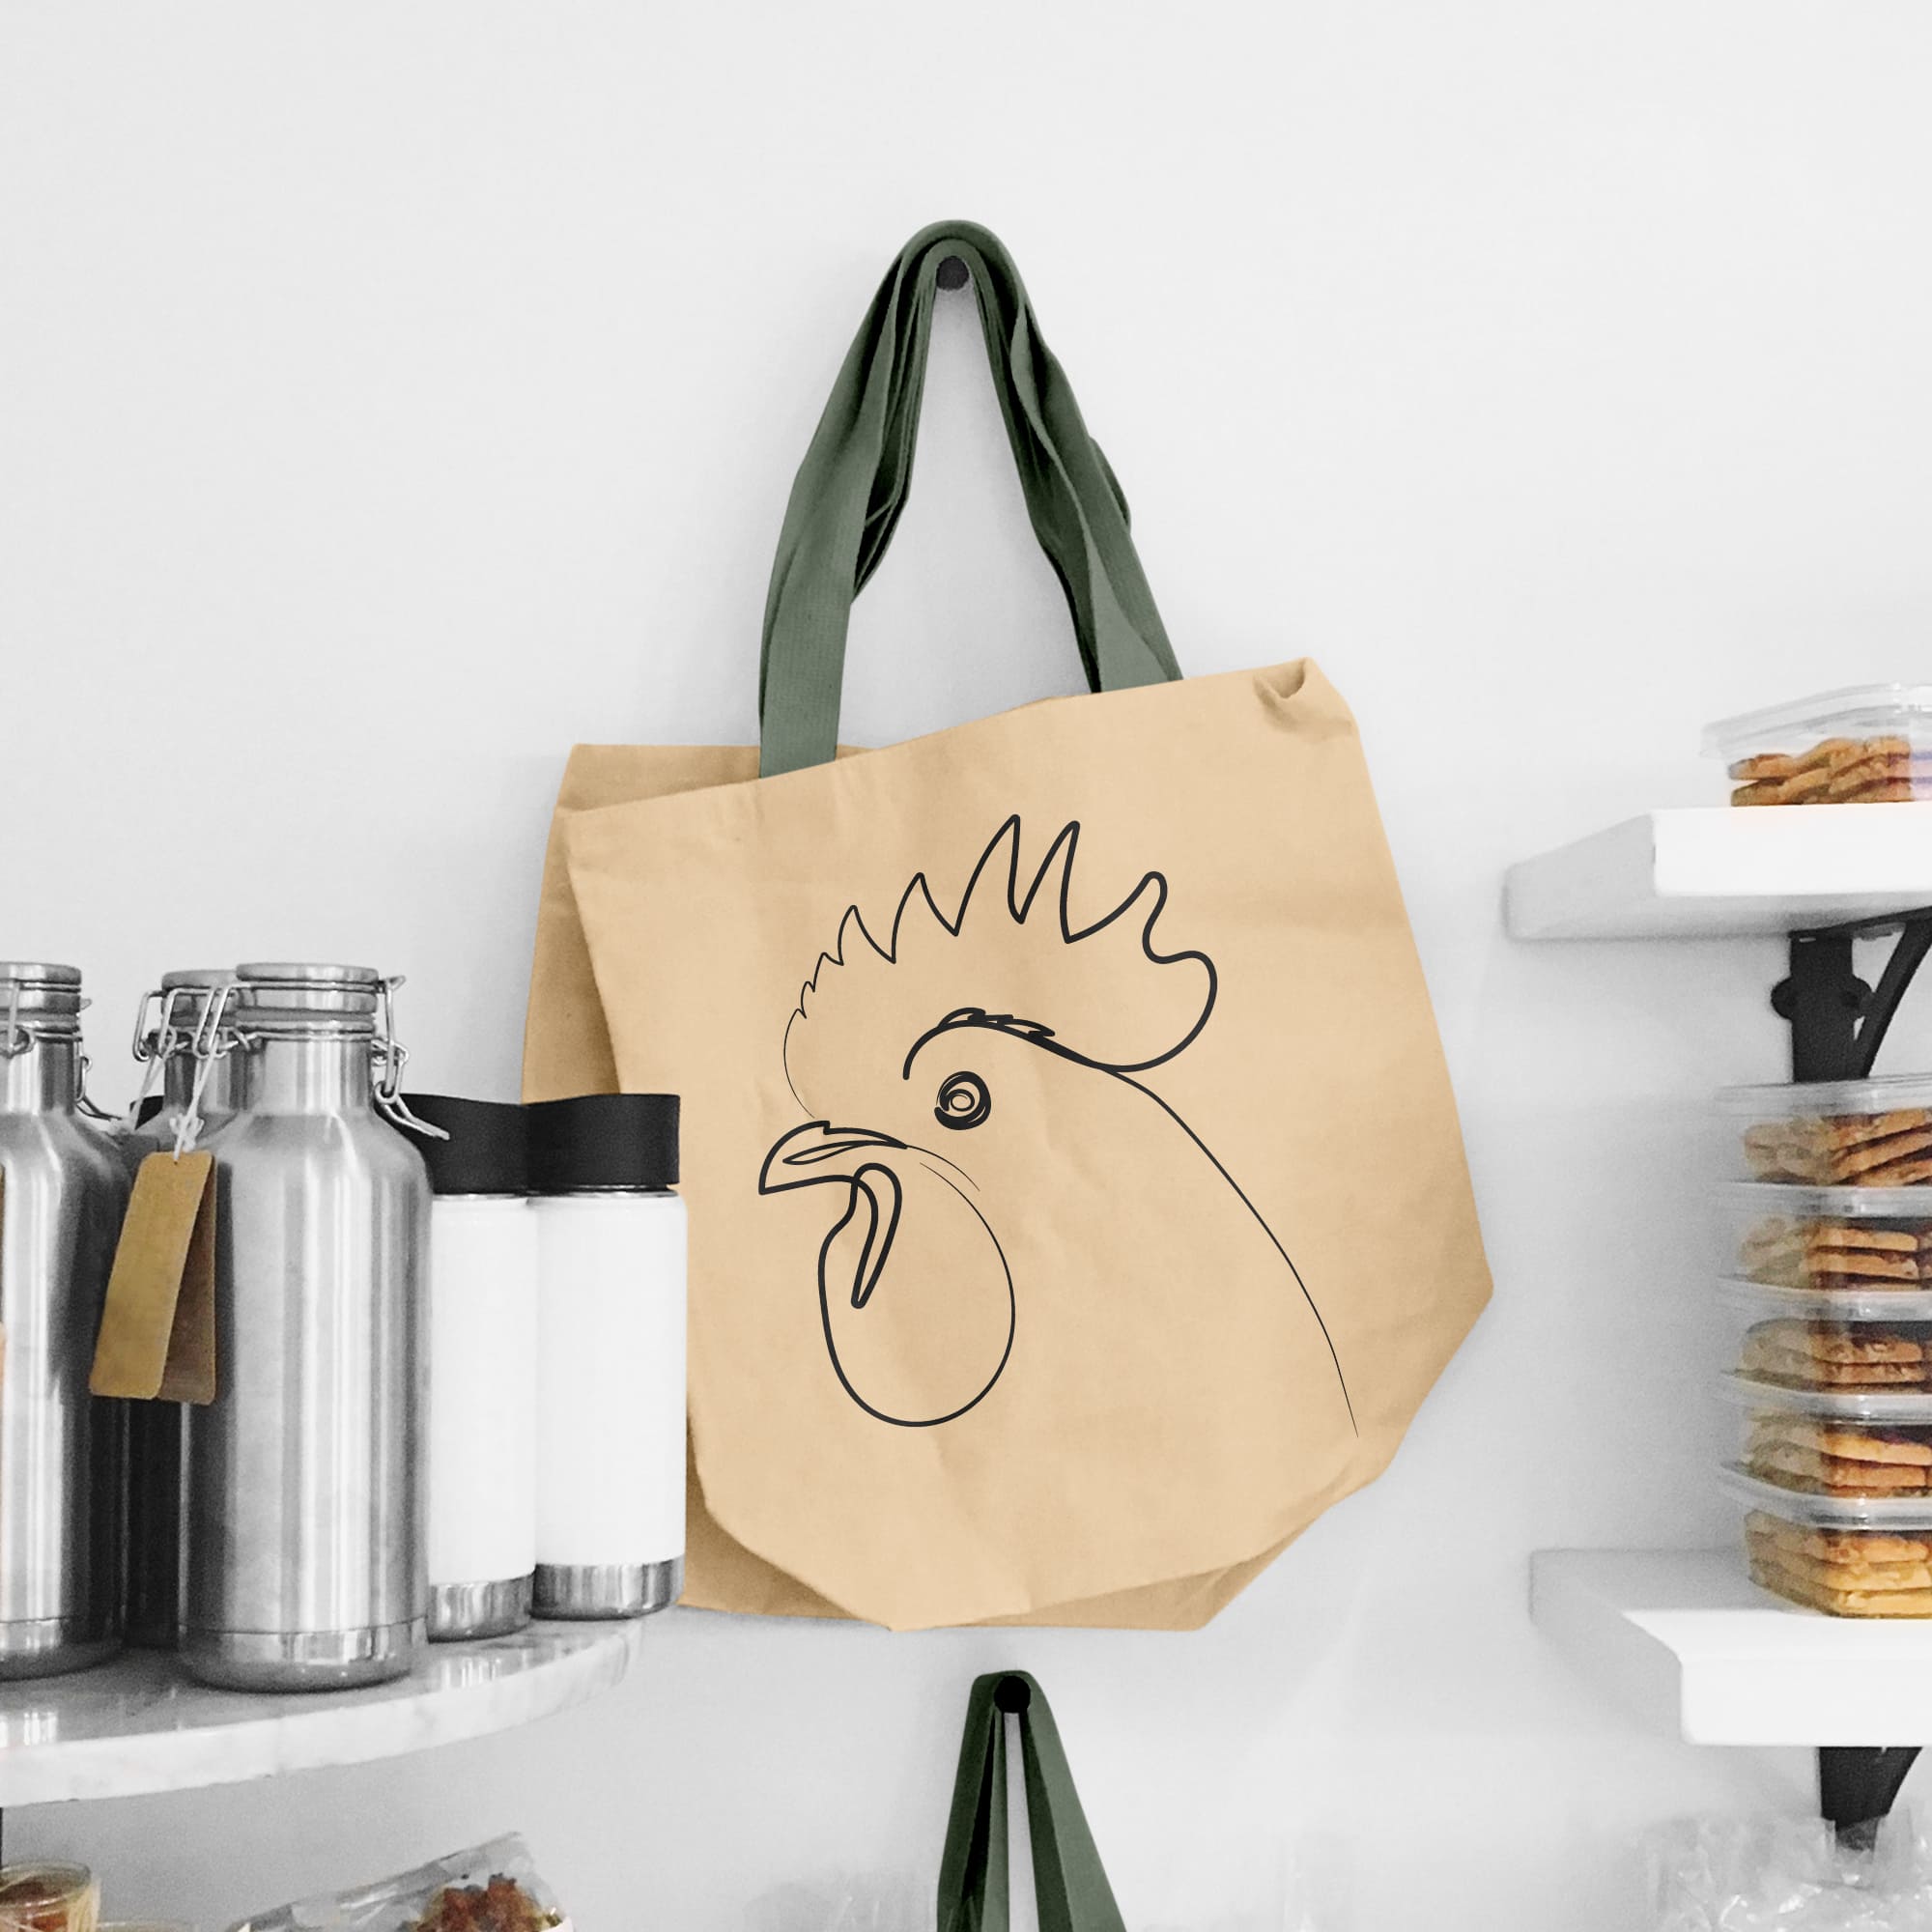 Paper bag with a chicken drawn on it.